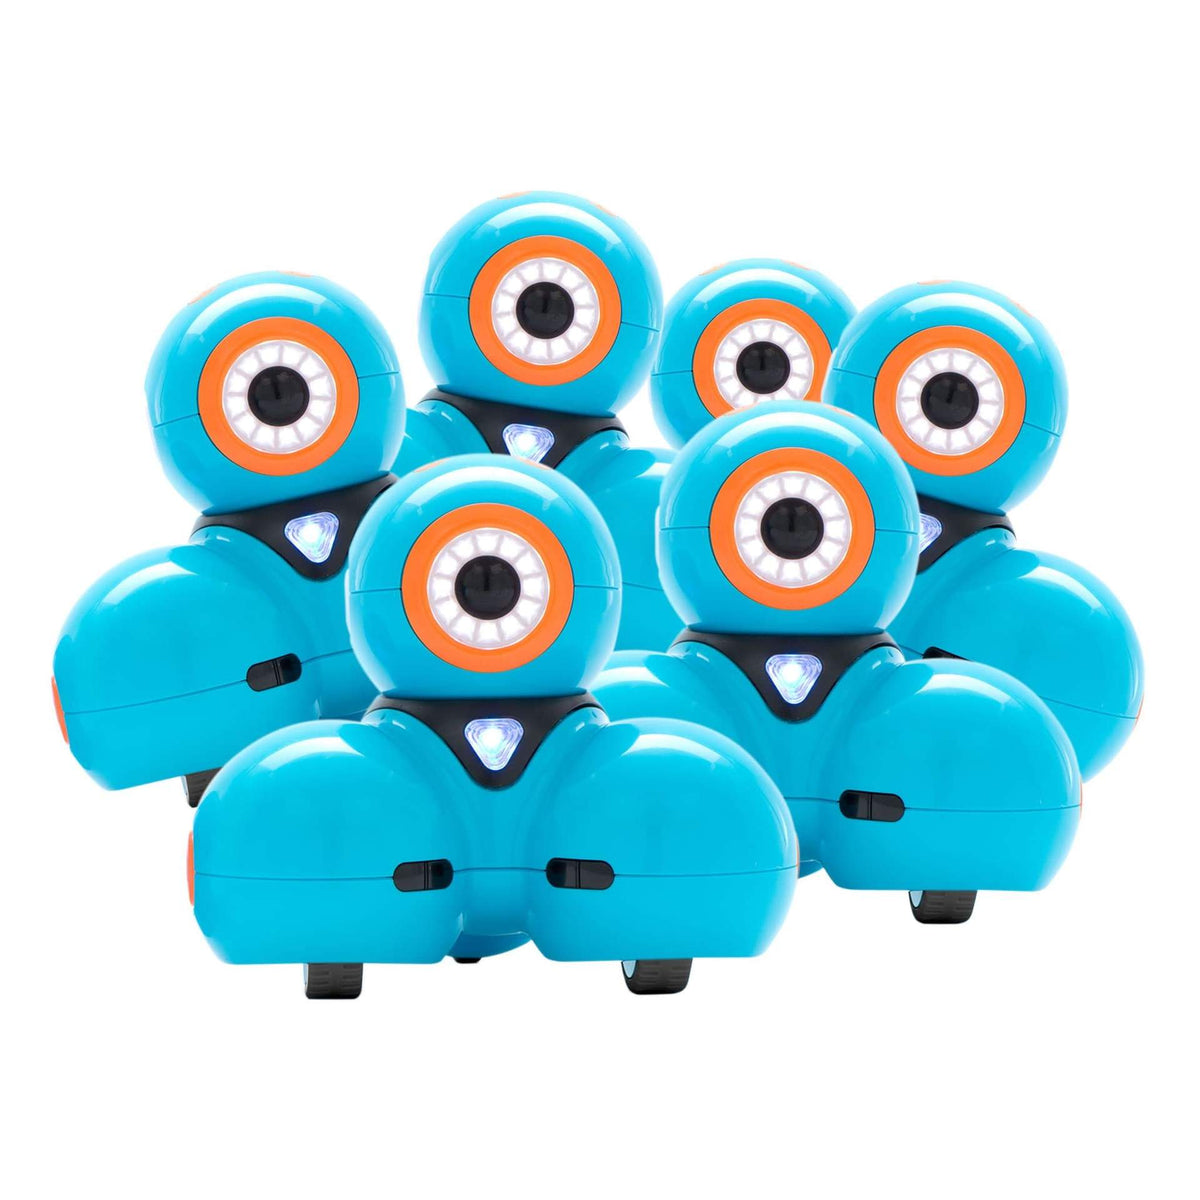 Wonder Workshop Dash Coding Robot for Kids (6 Years & Up) Voice Activated -  Navigates Objects - 5 Free Programming STEM Apps, Blue